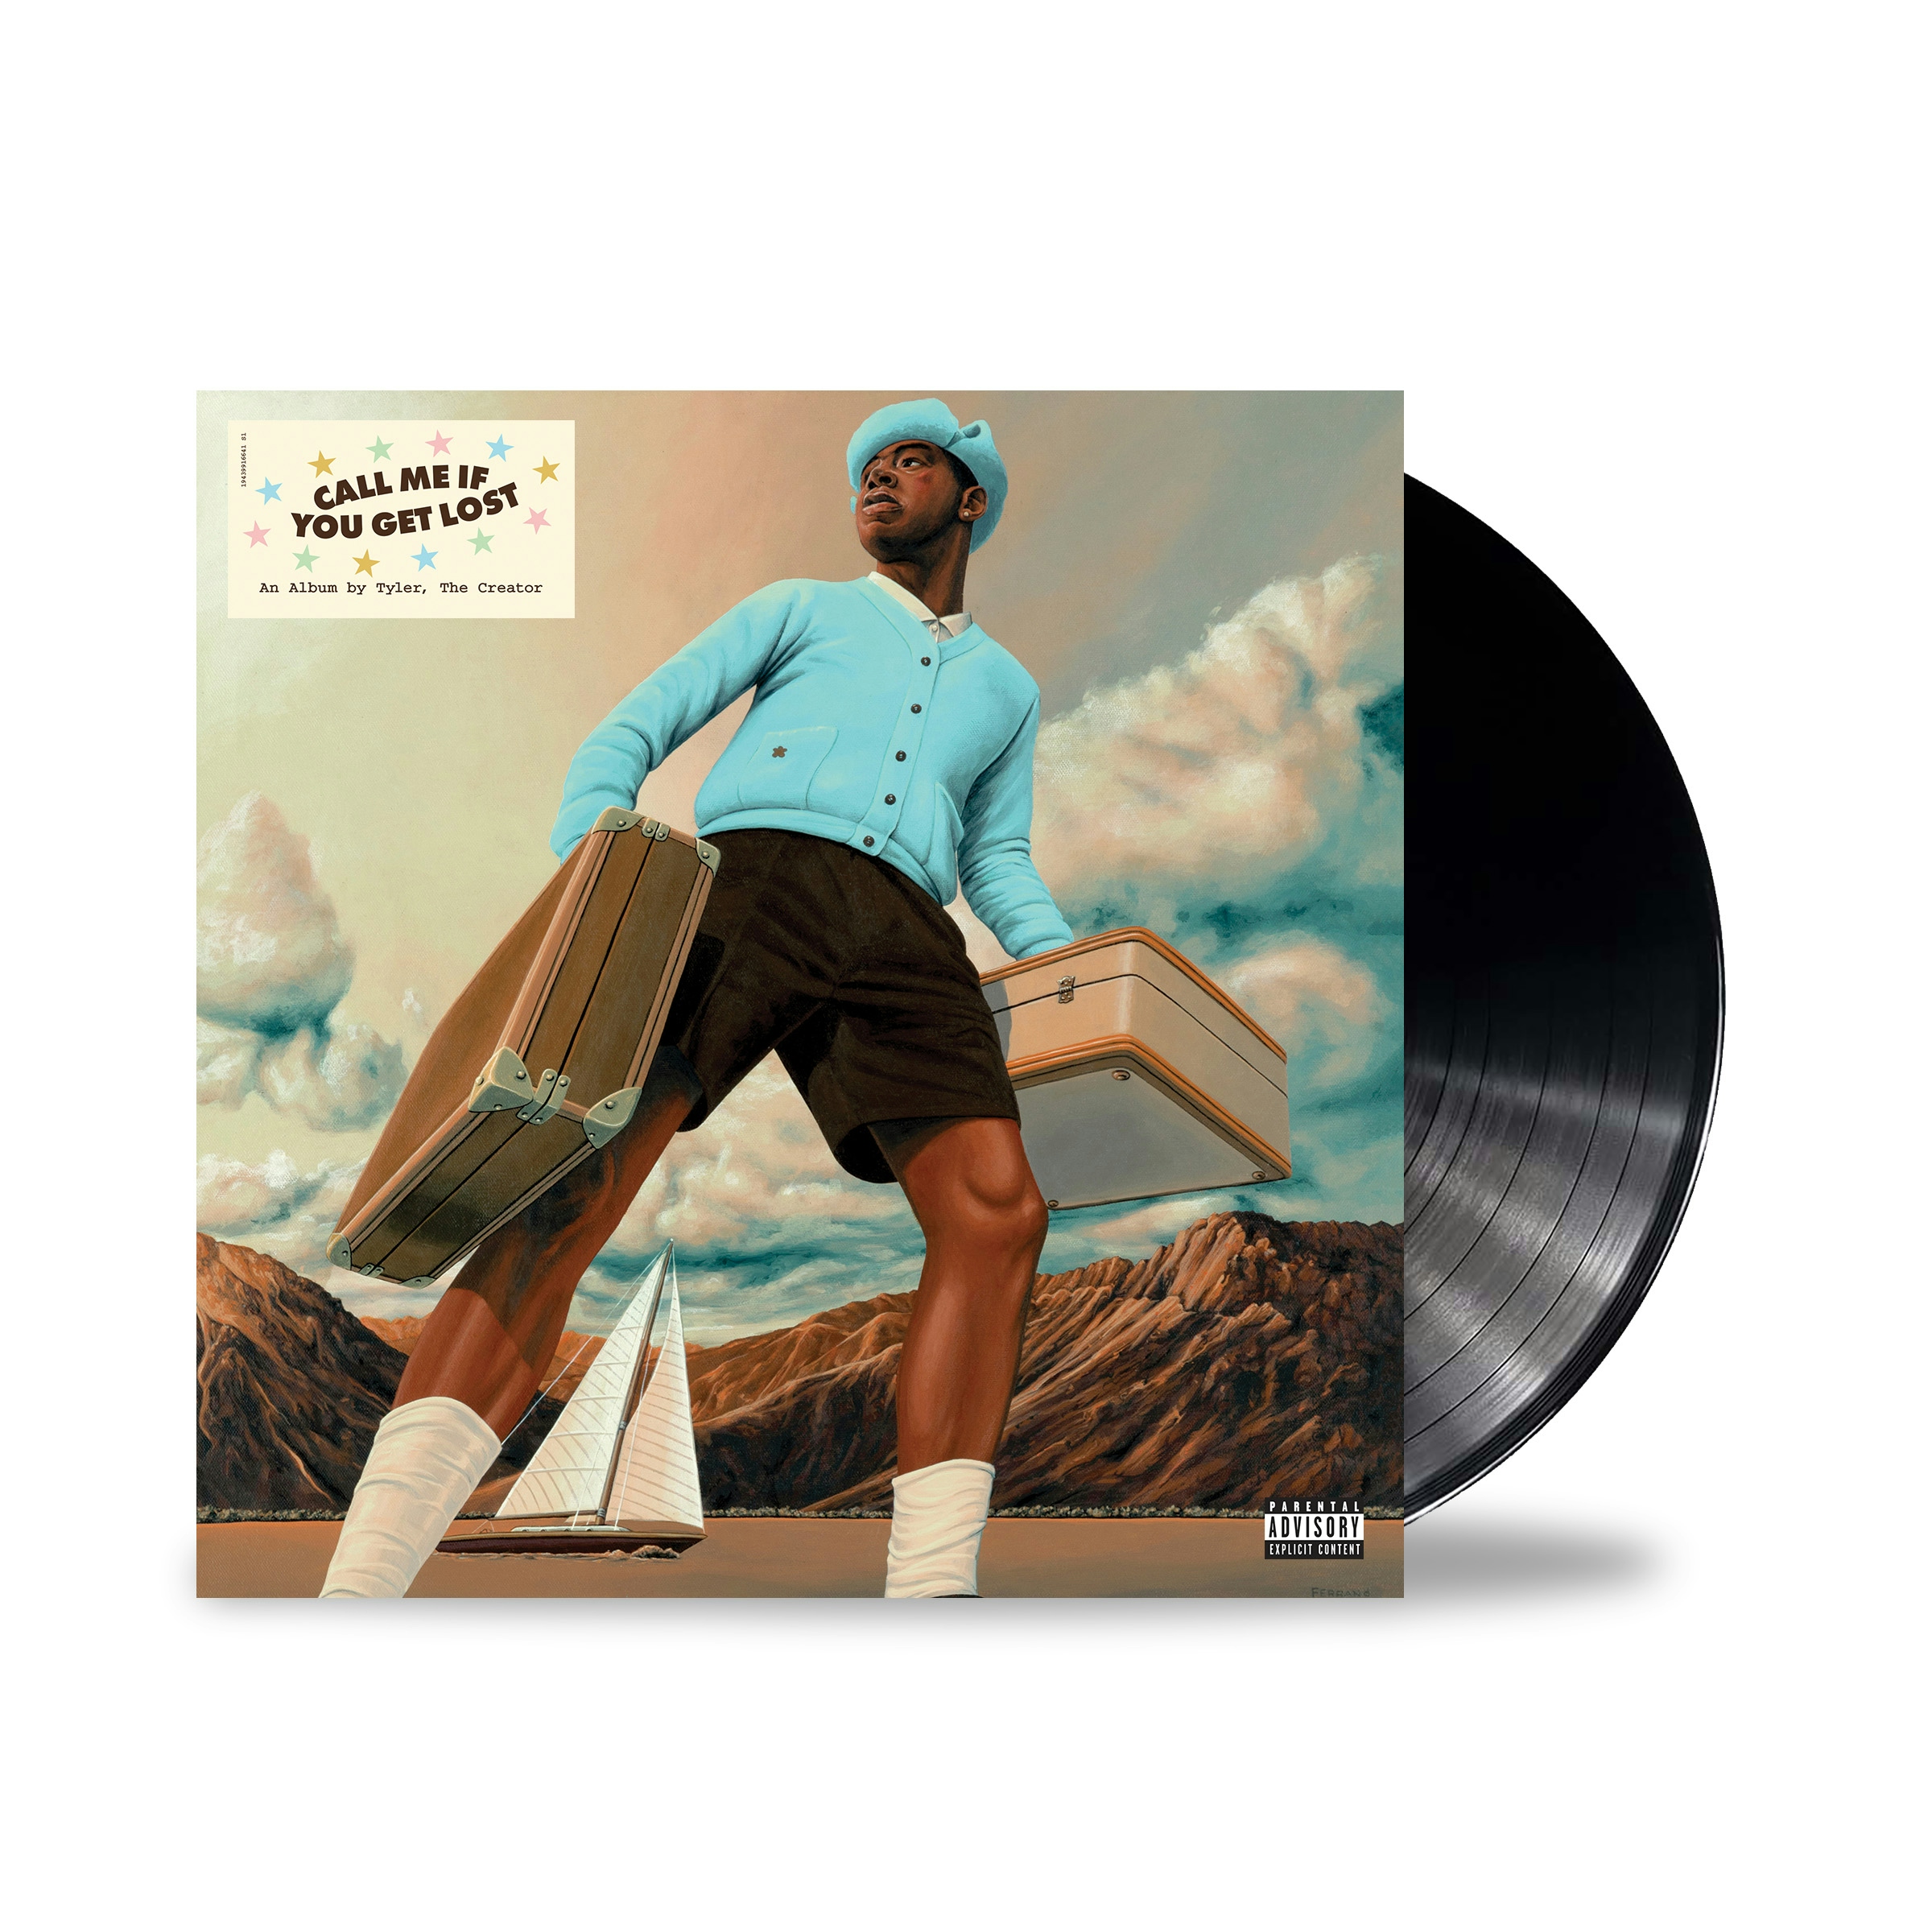 Album artwork for Call Me If You Get Lost by Tyler The Creator